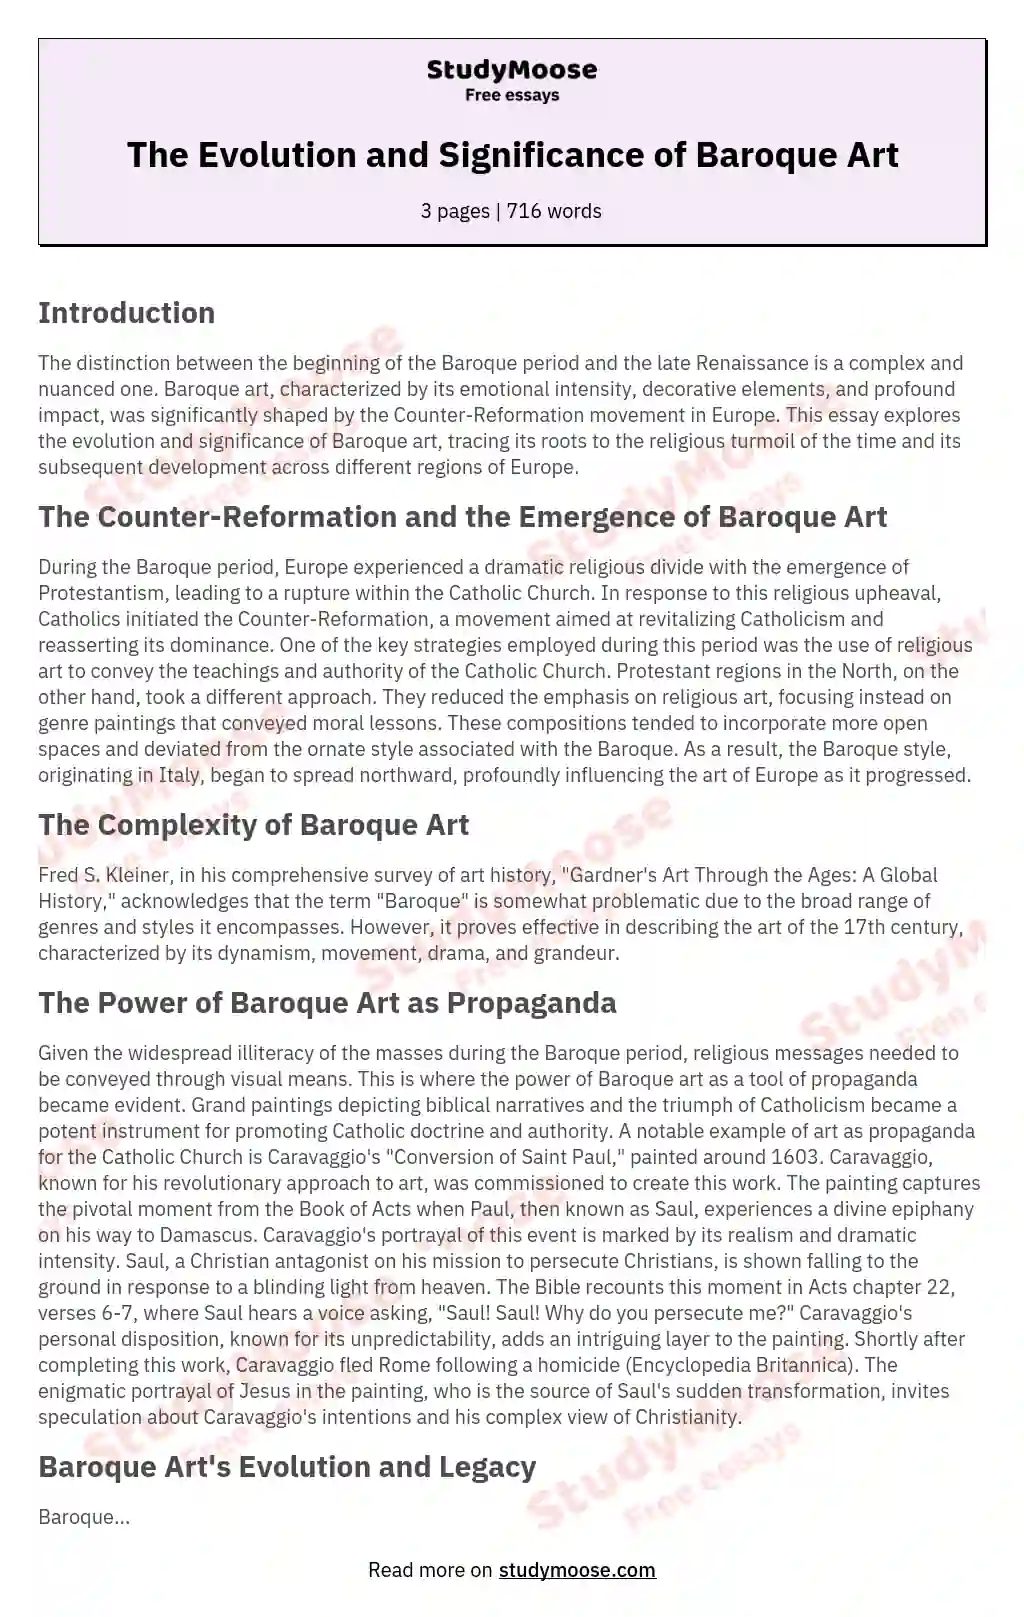 The Evolution and Significance of Baroque Art essay